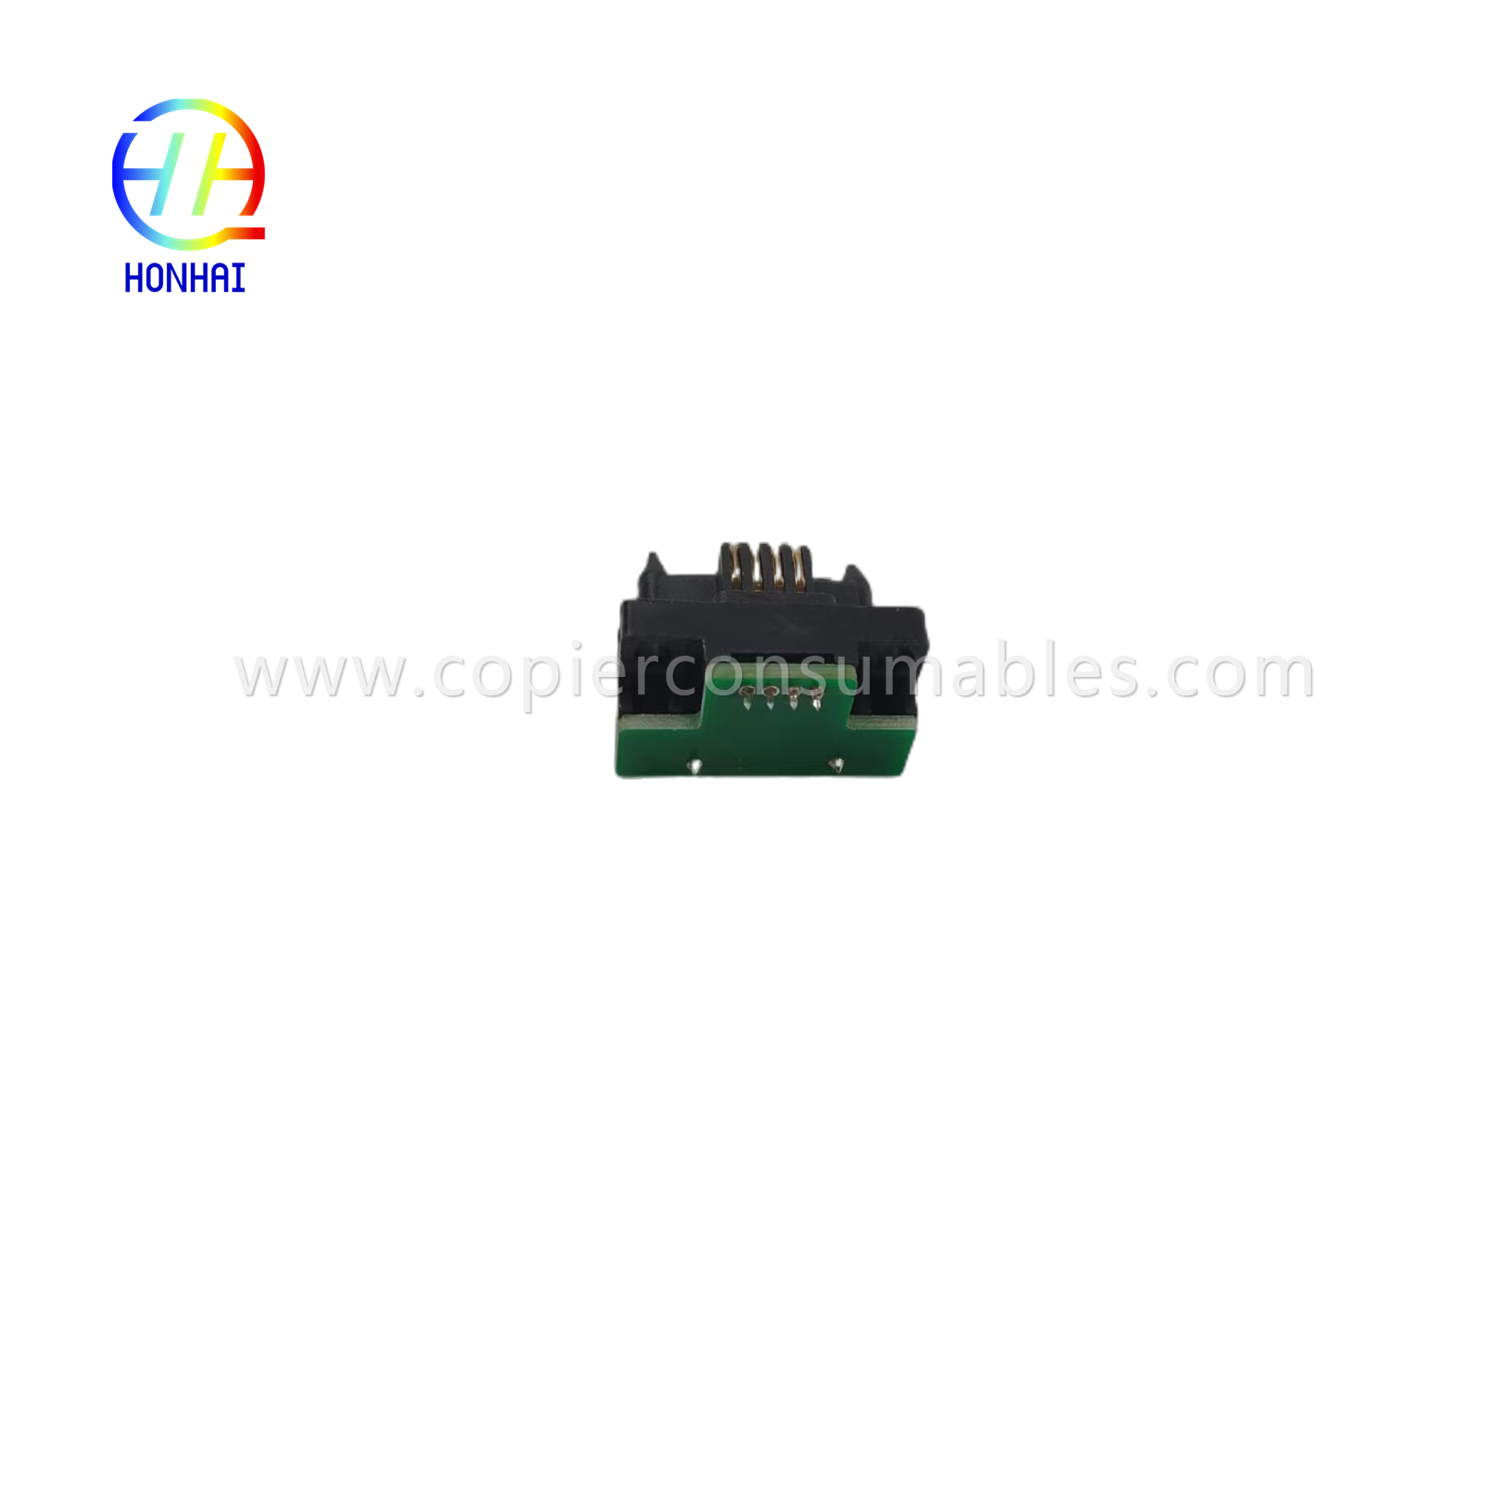 Drum Chip for Xerox 113R00673 113R673 Workcentre 5755 5875 5865 5845 5855 5875 5890 Chip (4)_副本